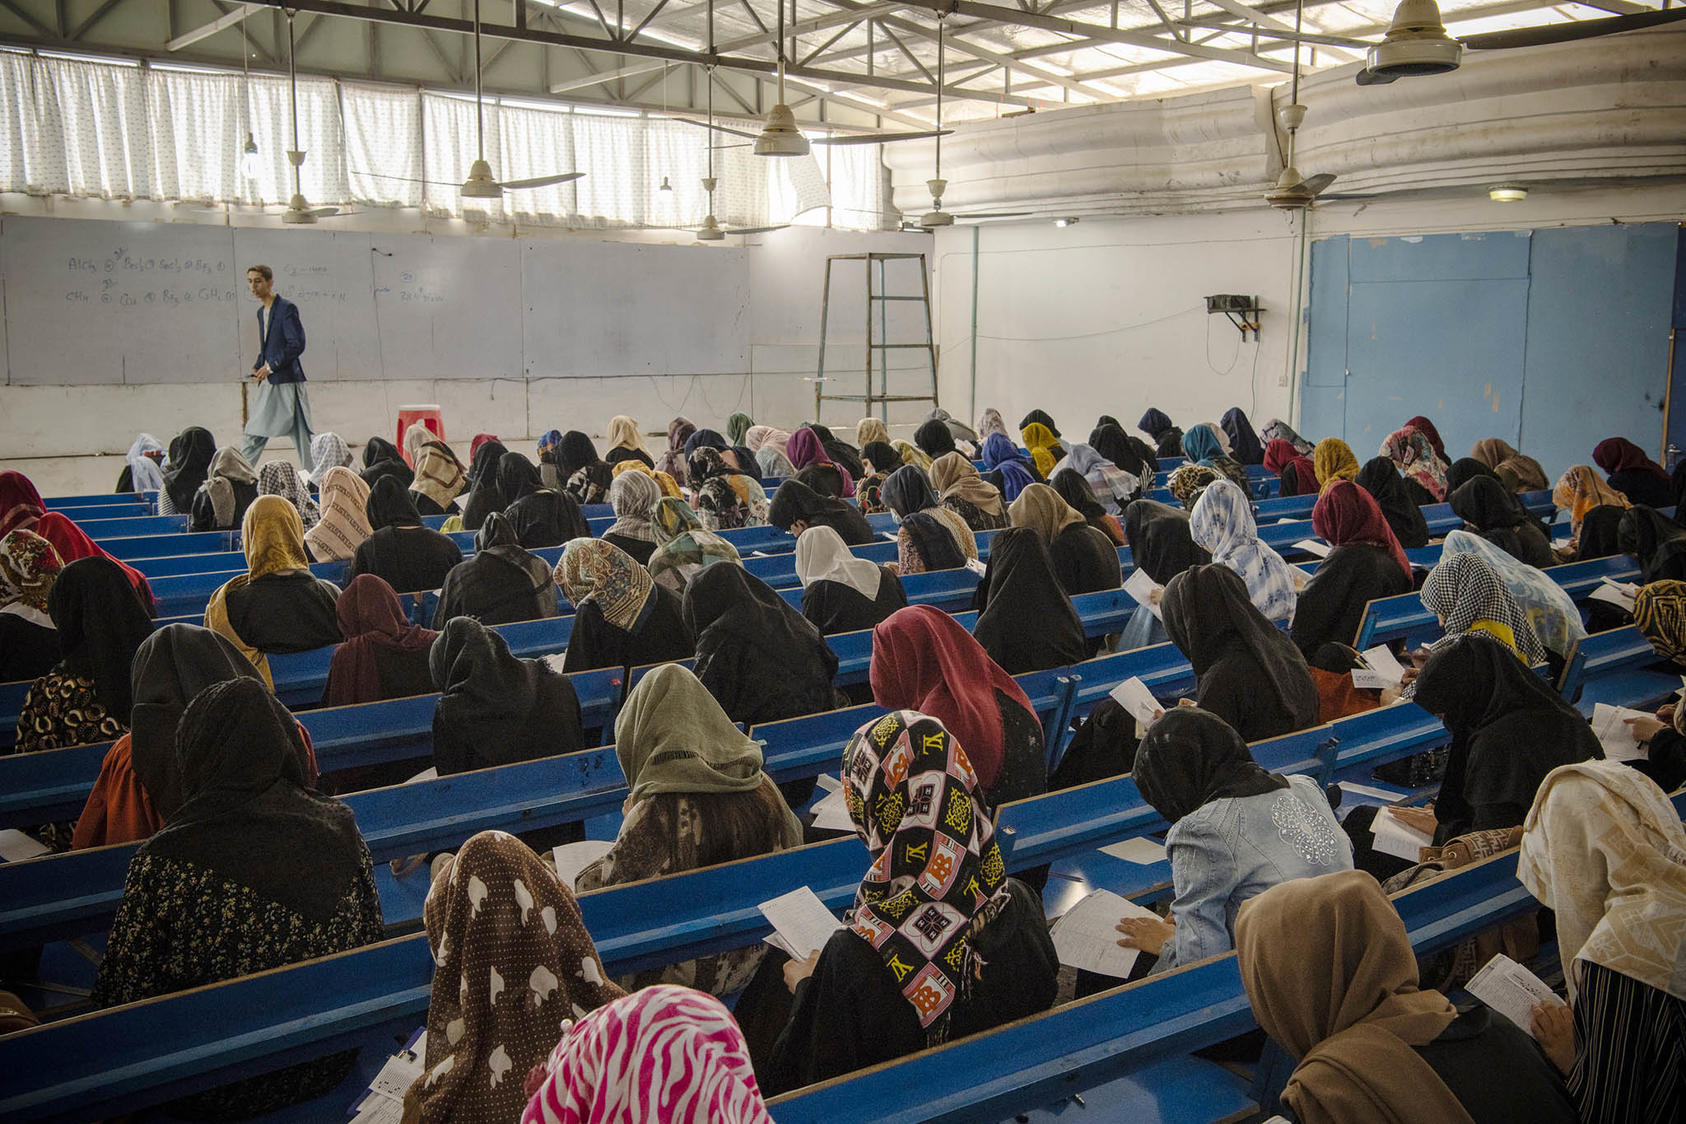 Girls prepare for the university entrance exam, Mazar-e-Sharif, Afghanistan, Oct. 8, 2021. Afghan girls are now barred from taking these entrance exams and attending high school or college. (Kiana Hayeri/The New York Times)